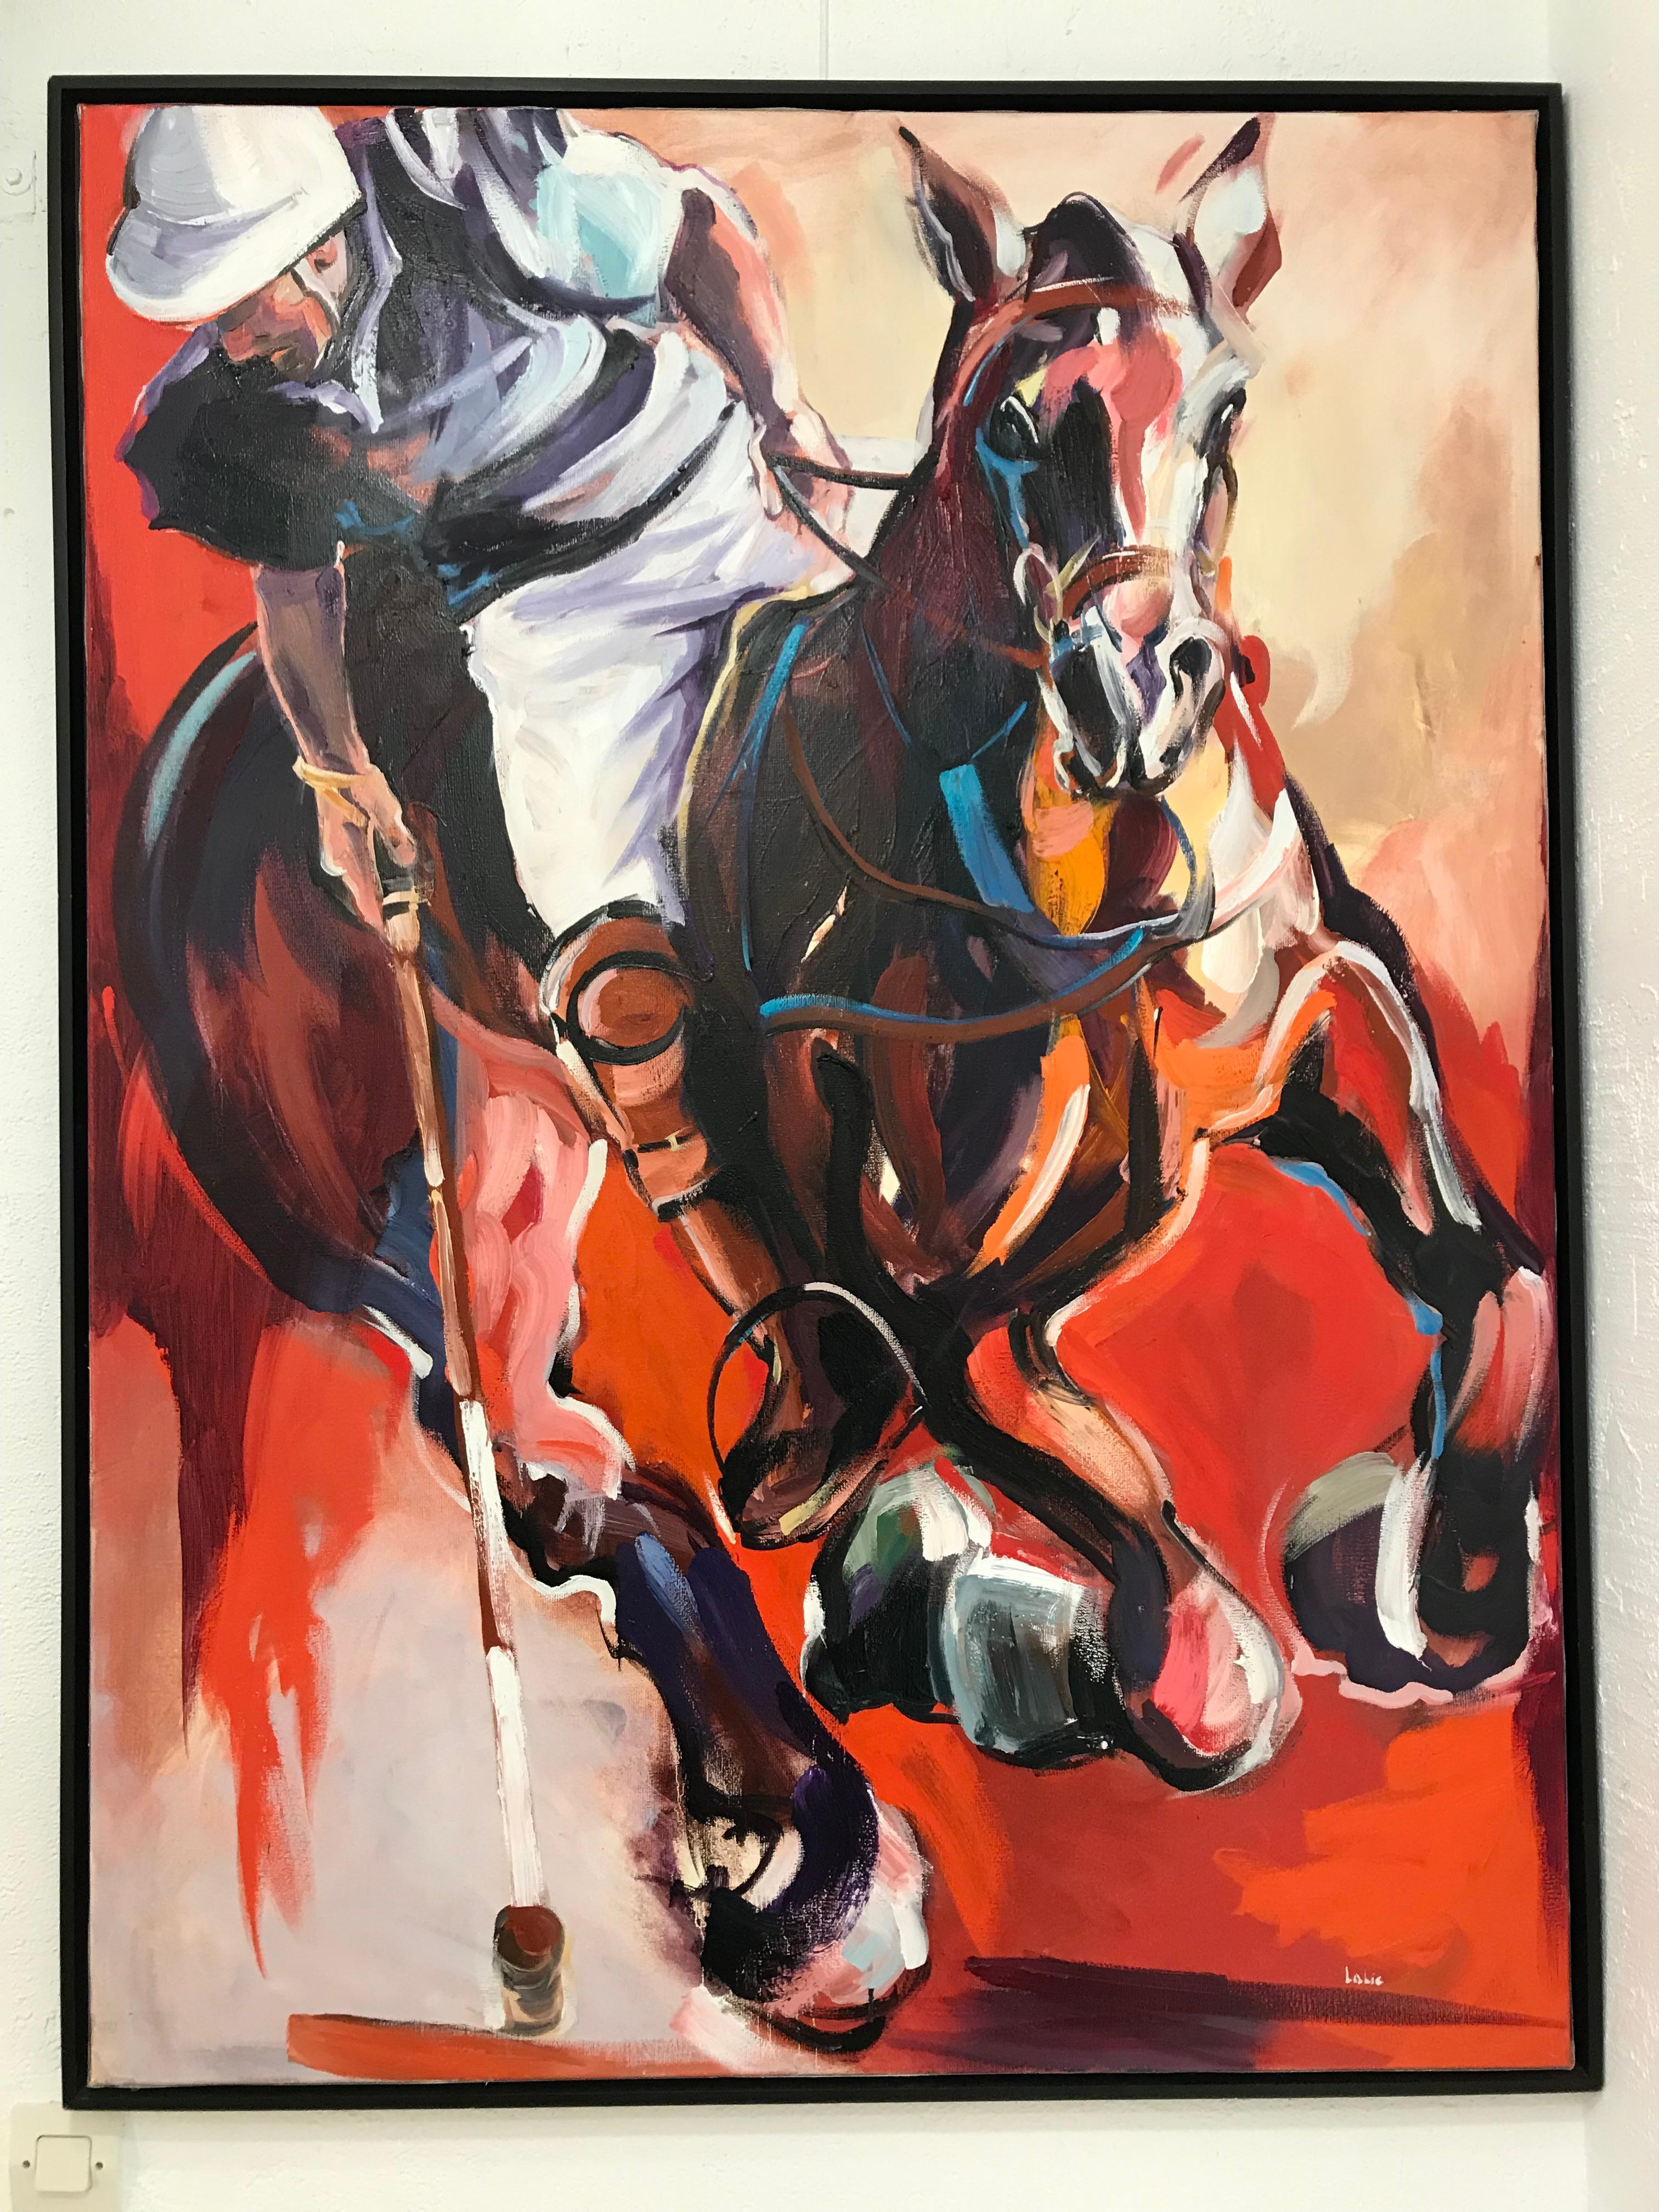 Bagatelle for a Polo - Painting by Sonia Lalic